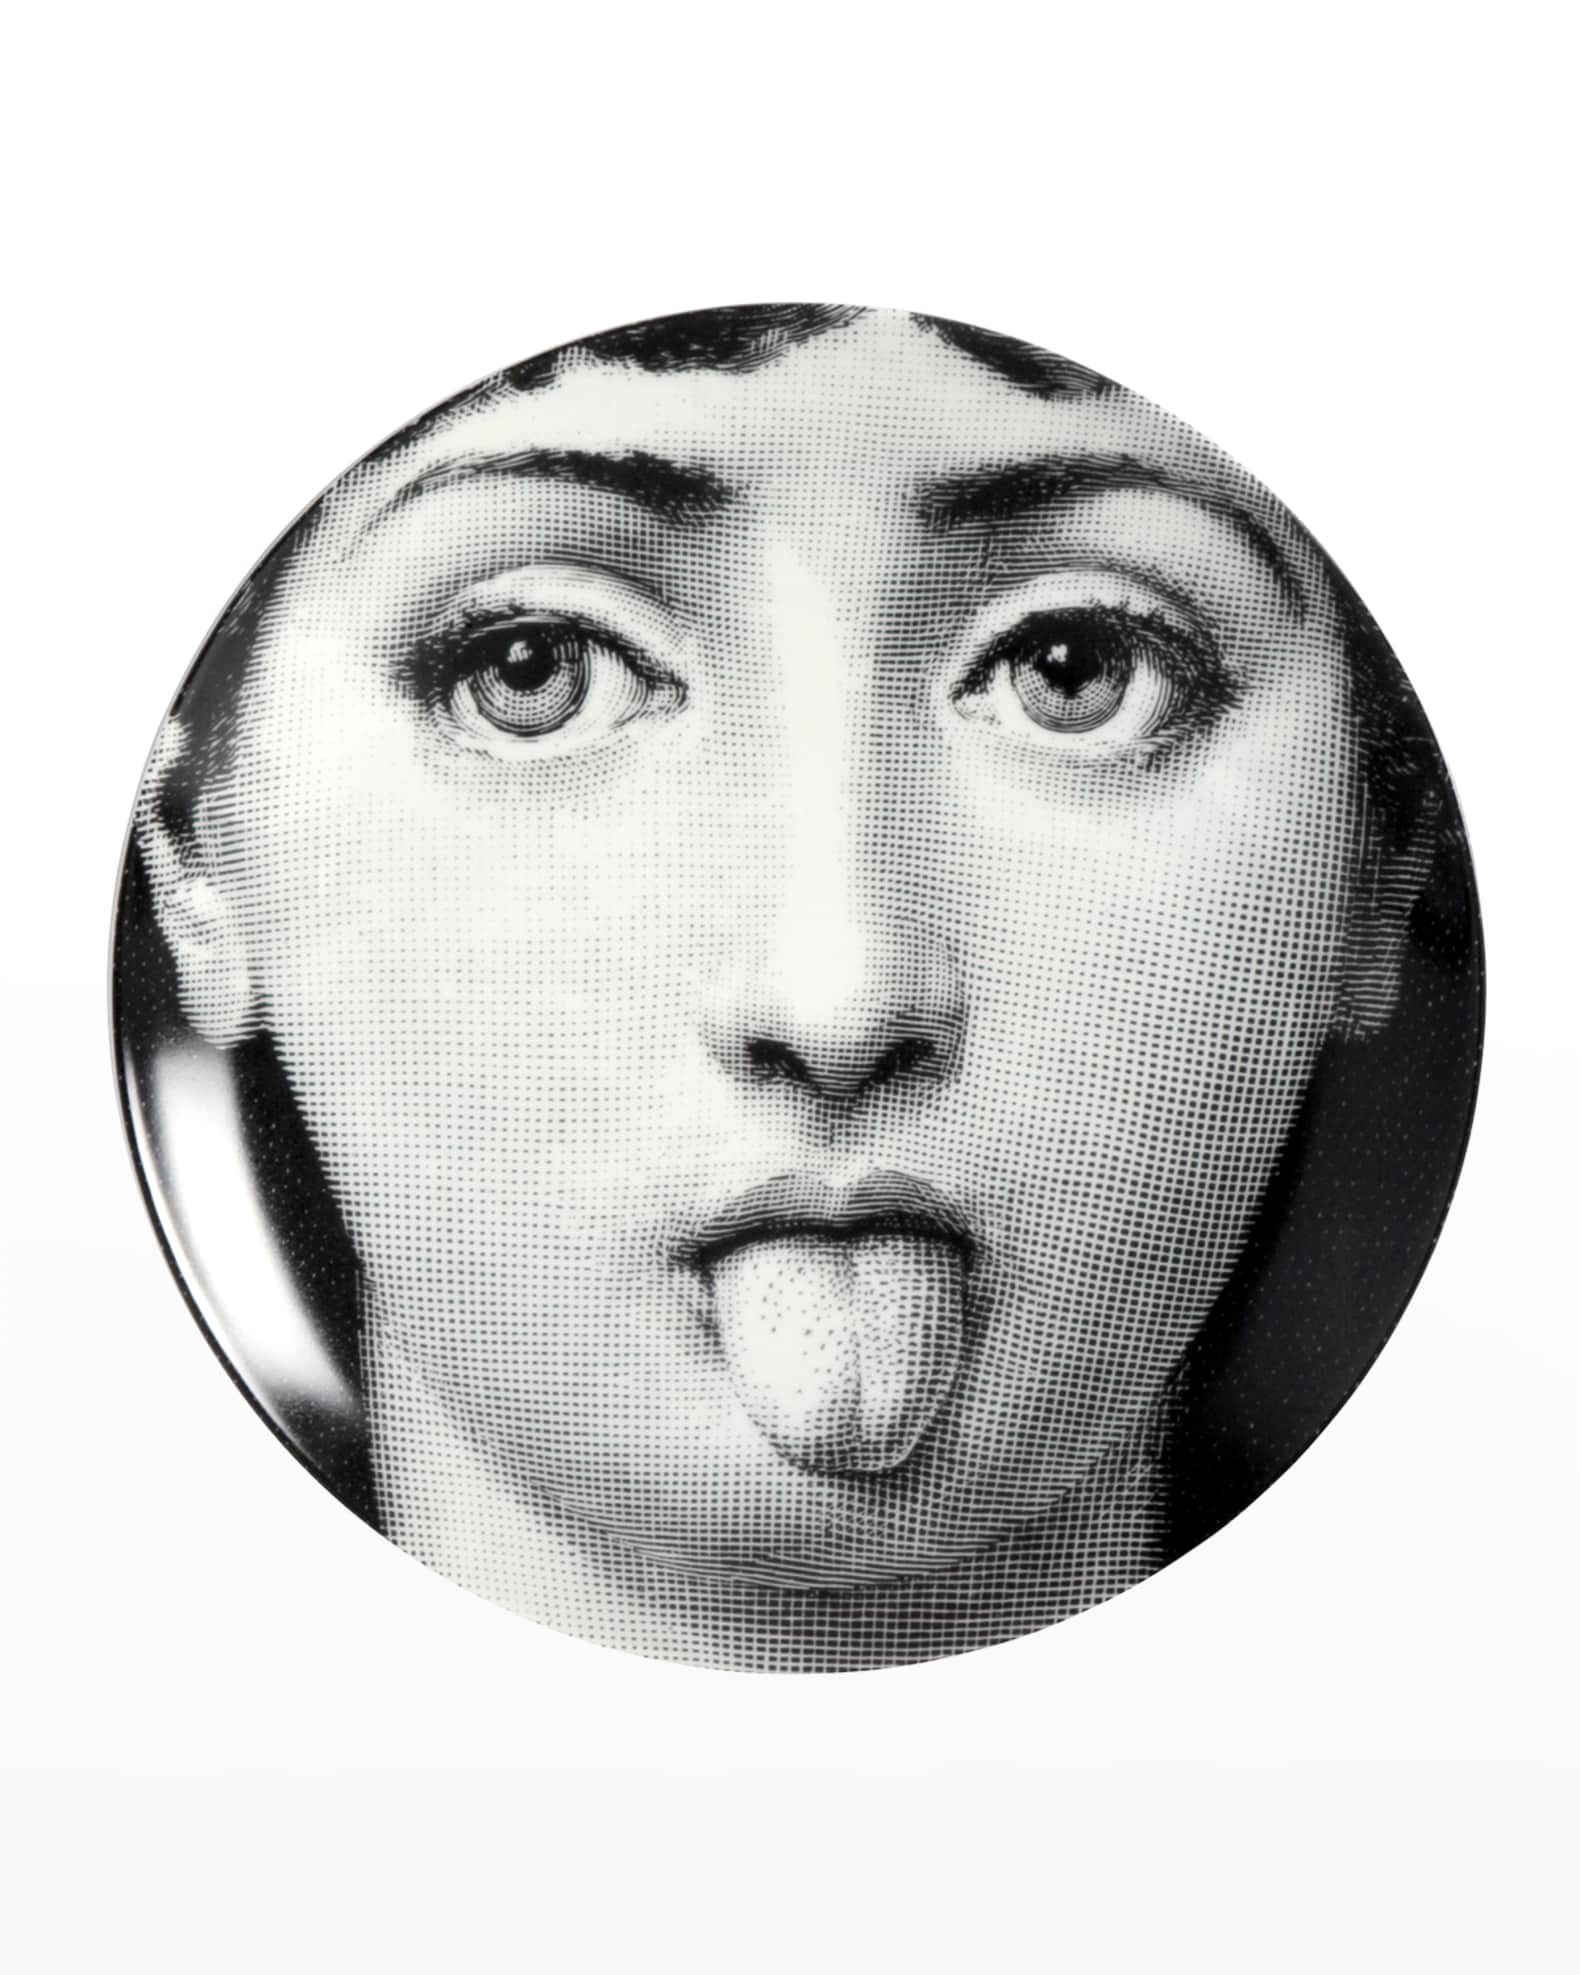 Fornasetti Home Accessories − Browse 400+ Items now at $122.00+